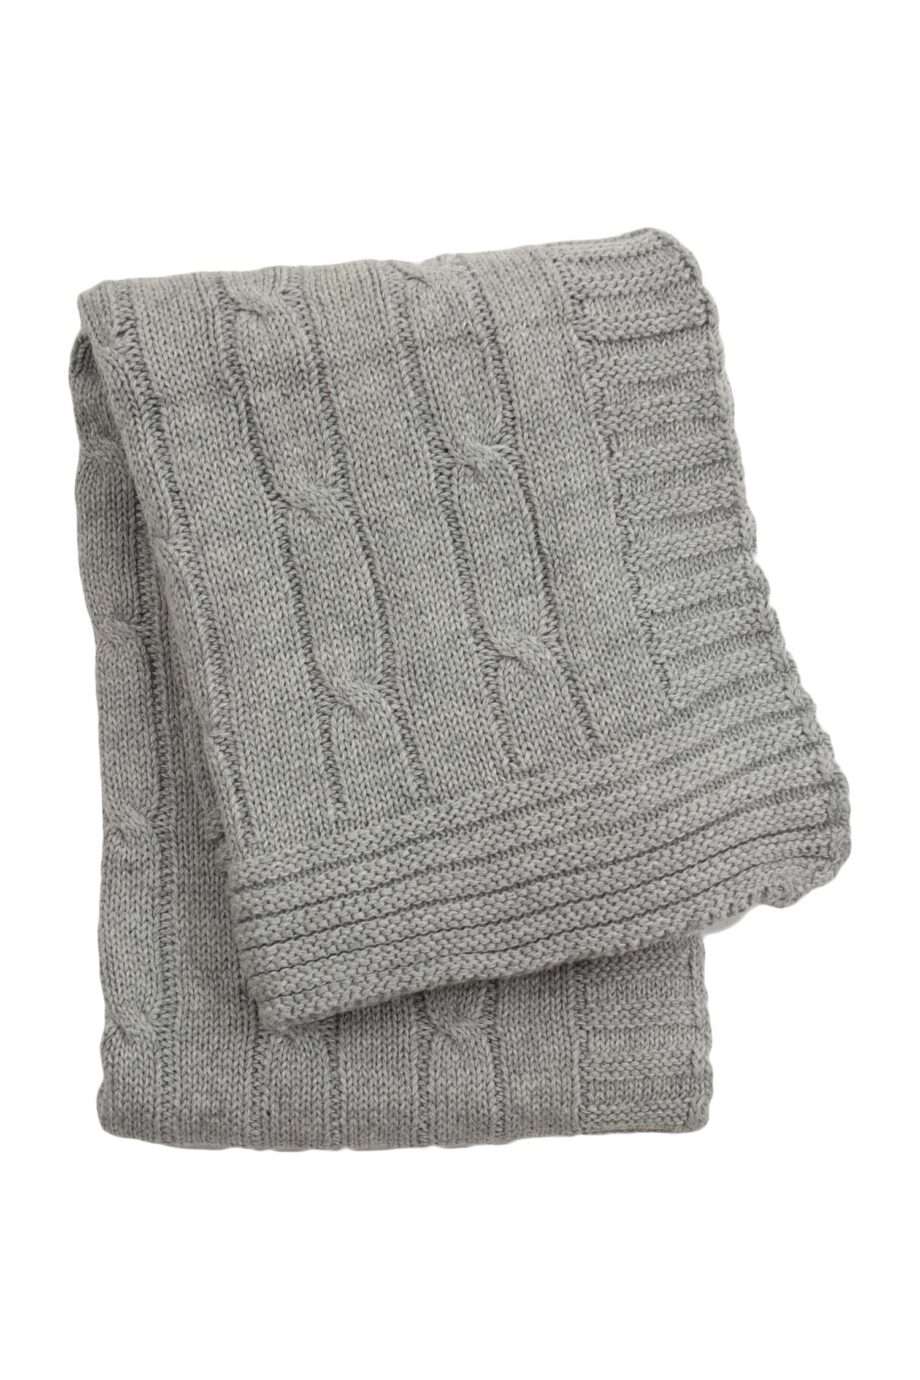 twist light grey knitted cotton little blanket small